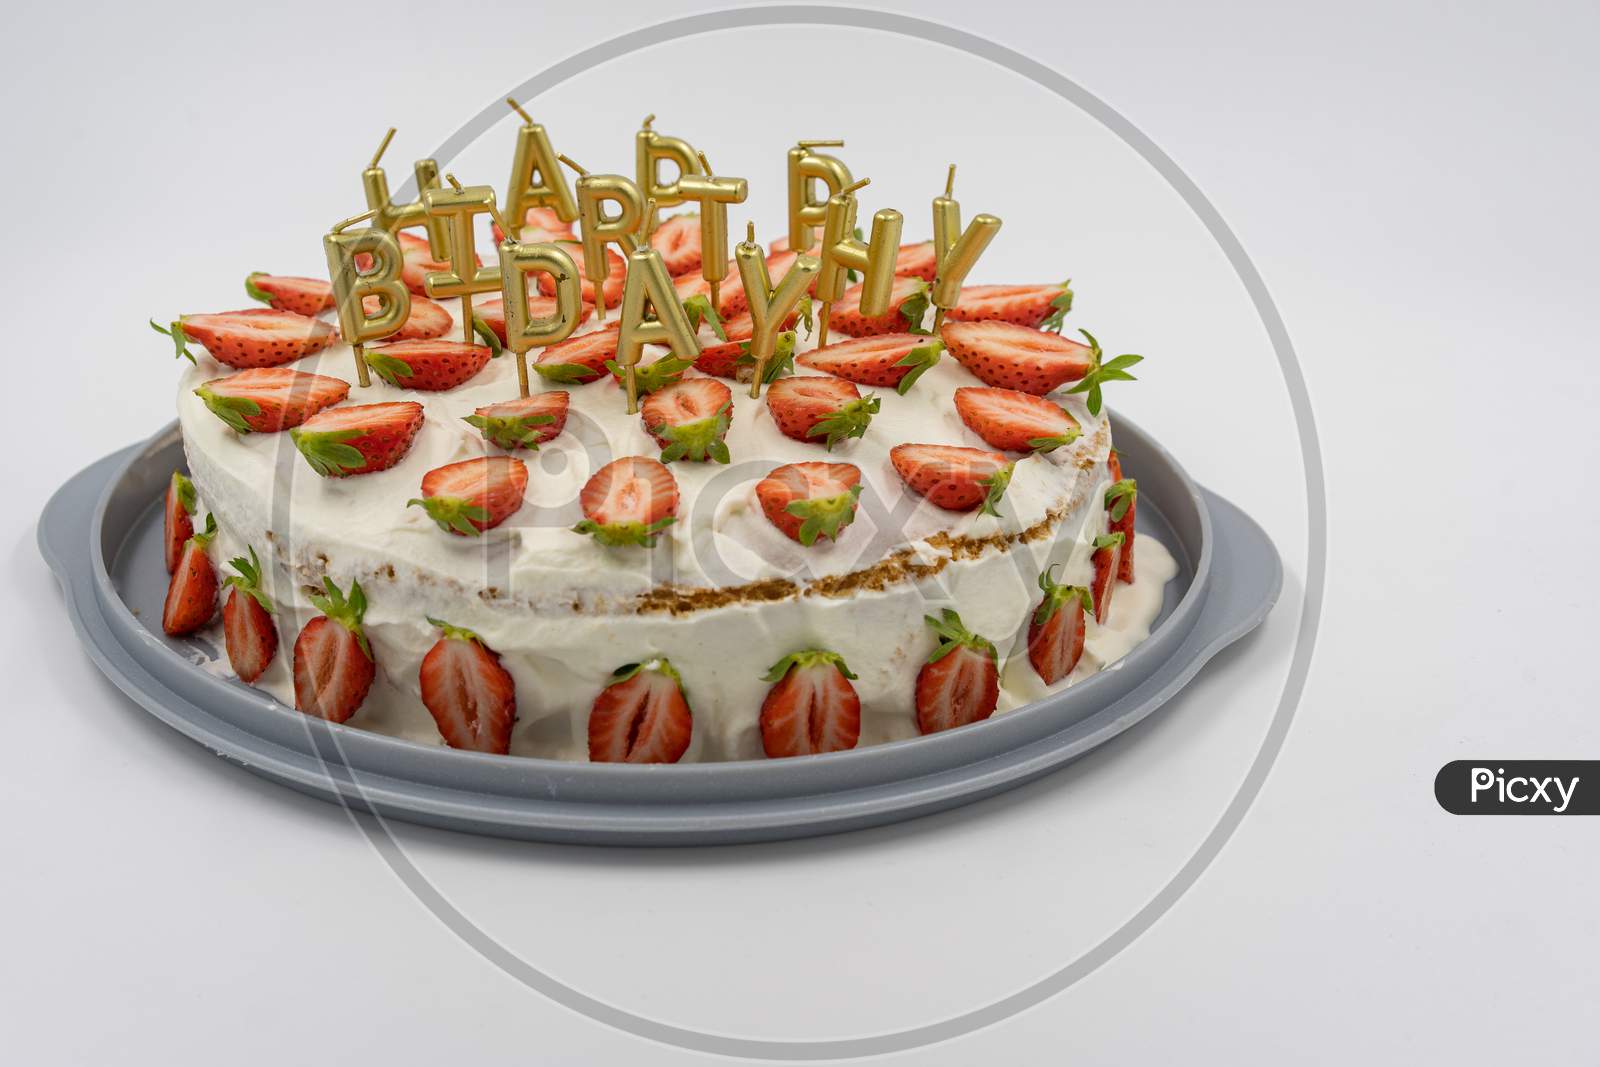 Isolated Strawberry Cheesecake On White Background Decorates With Golden Candles As Happy Birthday Letters.